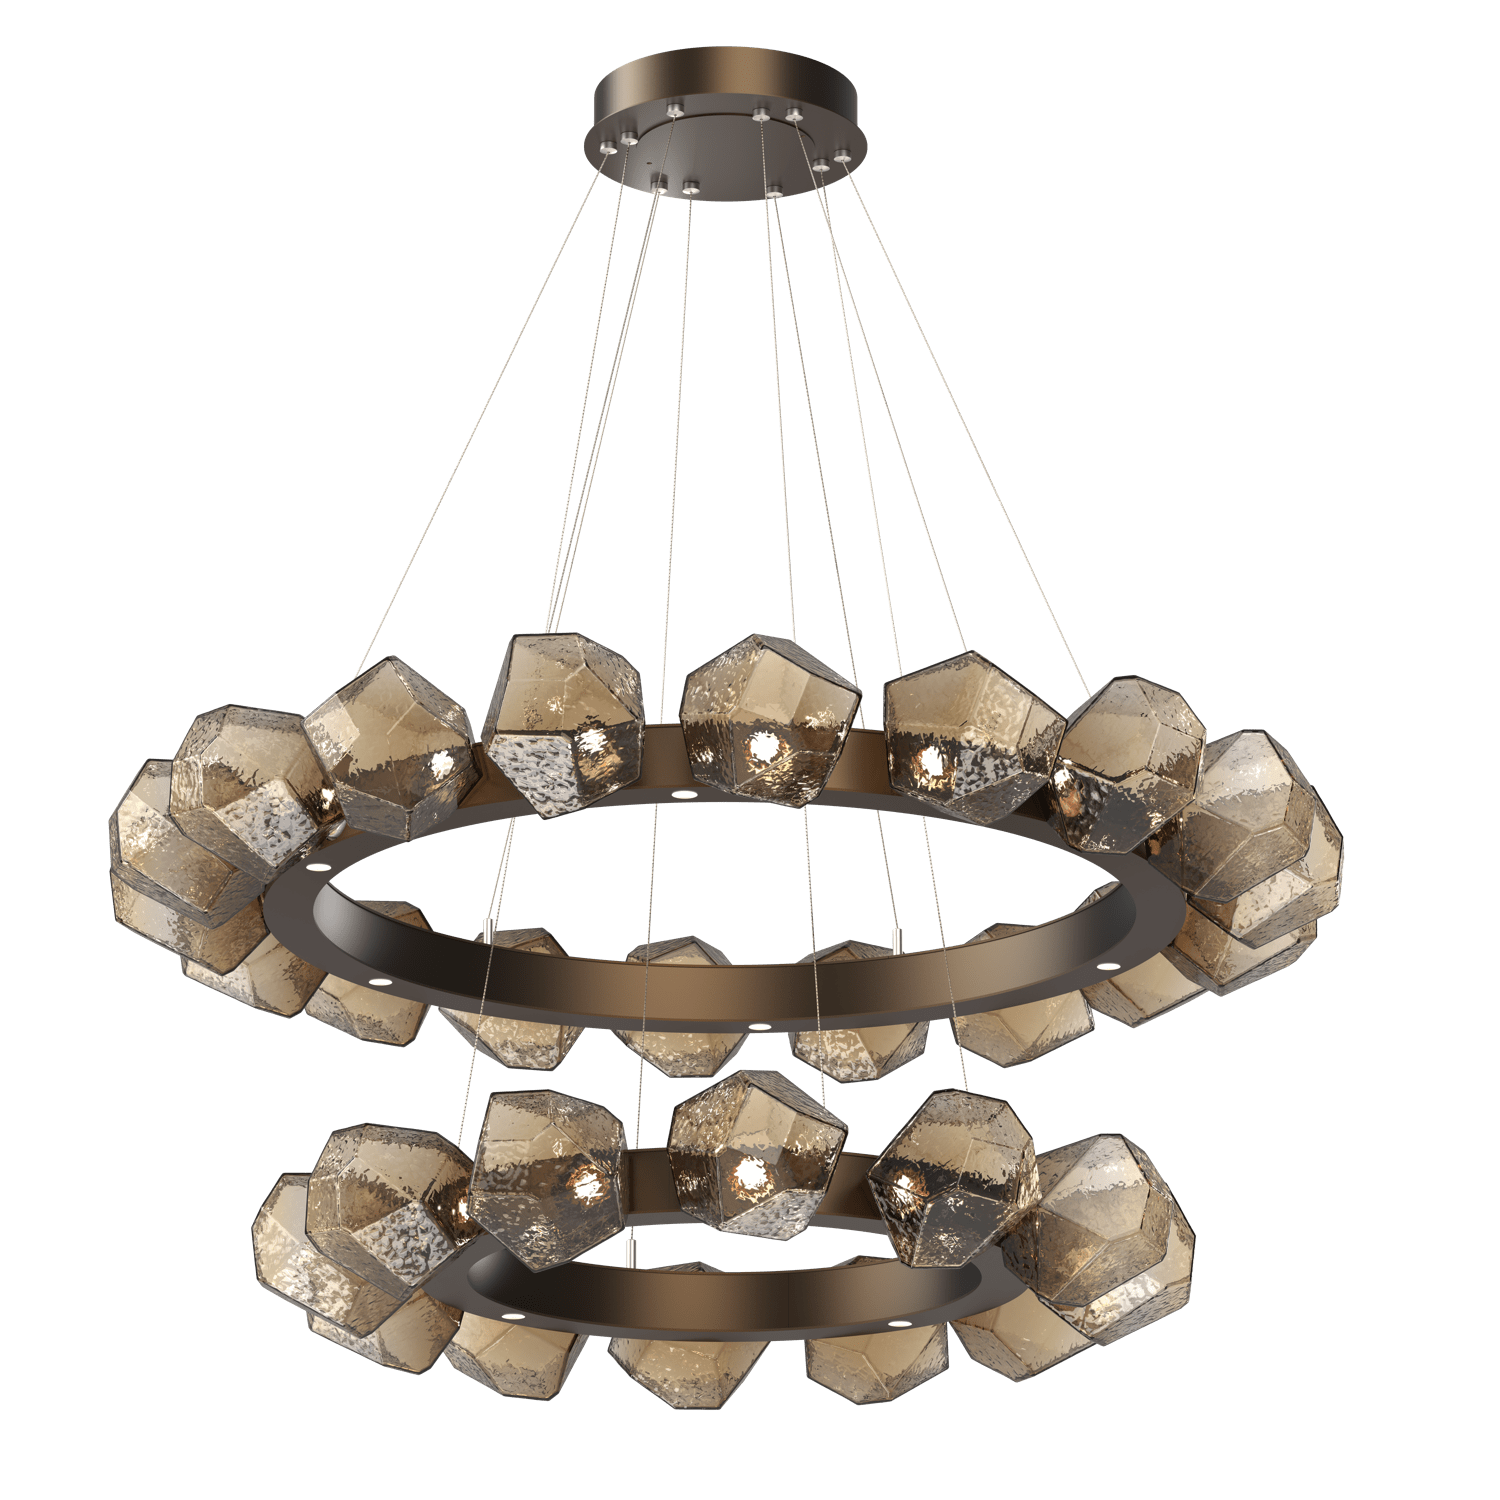 CHB0039-2T-FB-B-Hammerton-Studio-Gem-48-inch-two-tier-radial-ring-chandelier-with-flat-bronze-finish-and-bronze-blown-glass-shades-and-LED-lamping